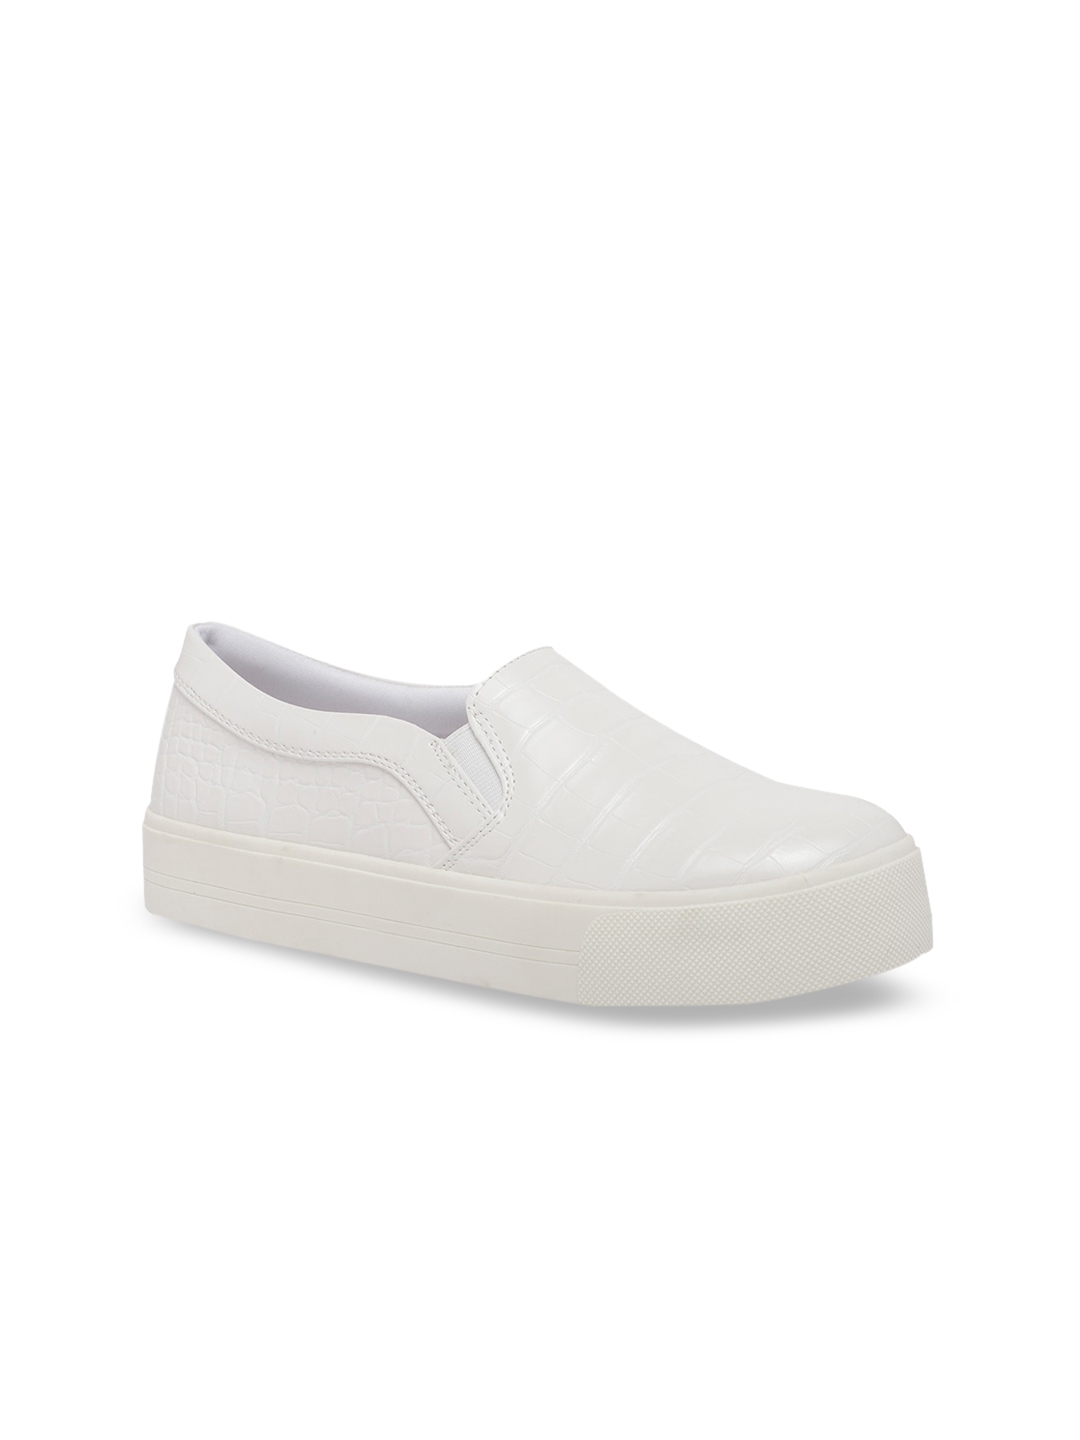 Buy Call It Spring Women White Solid Slip On Sneakers - Casual Shoes ...